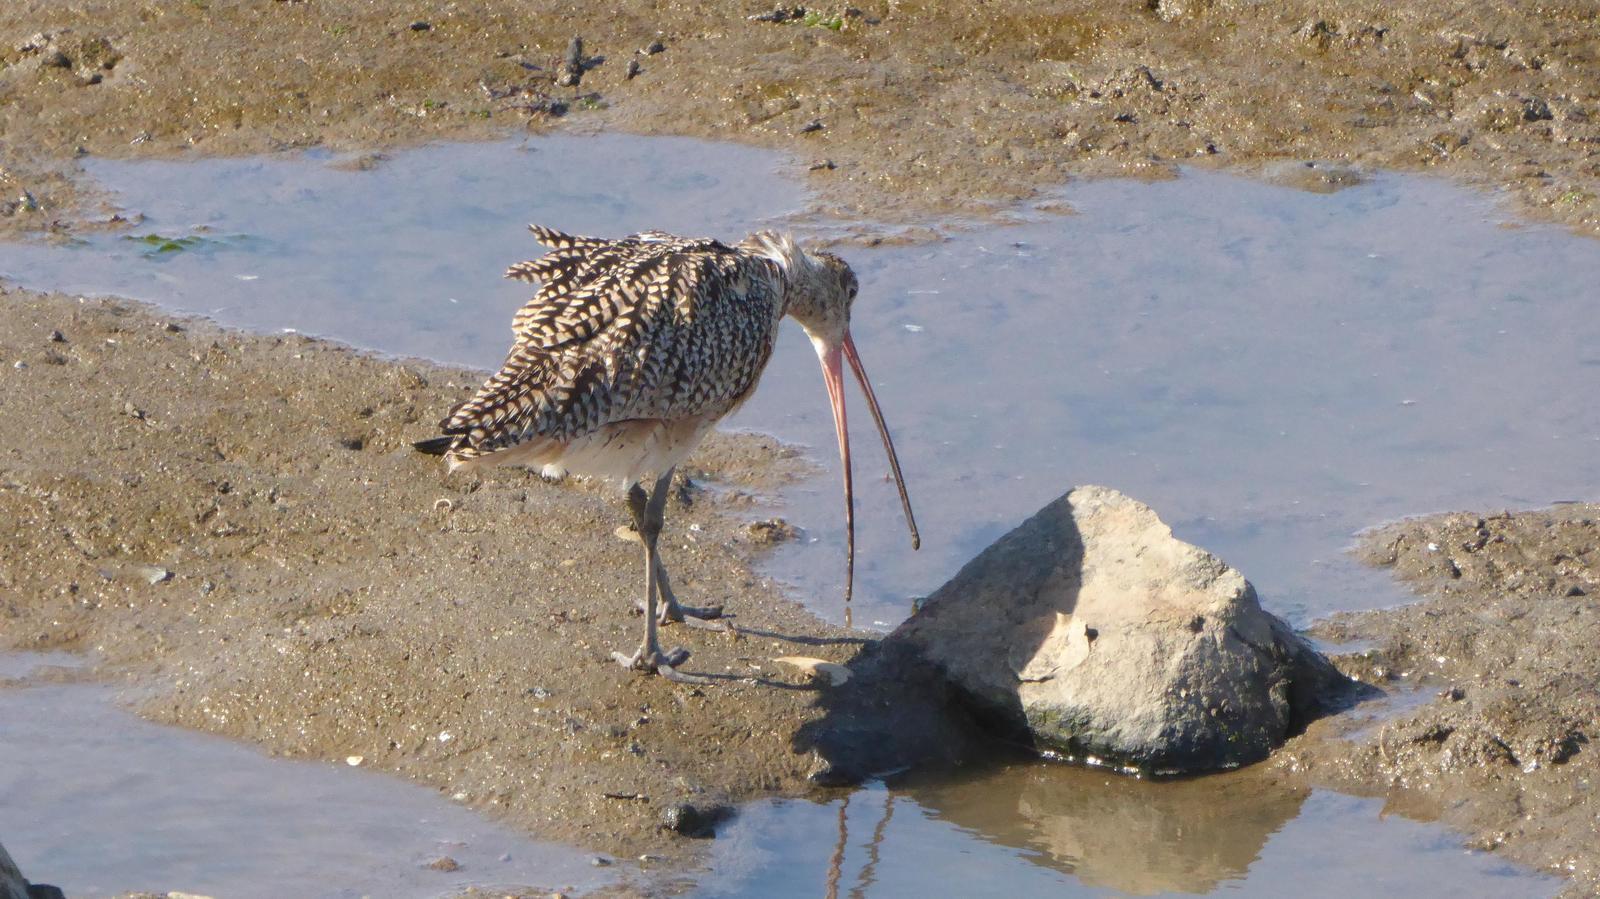 Long-billed Curlew Photo by Daliel Leite